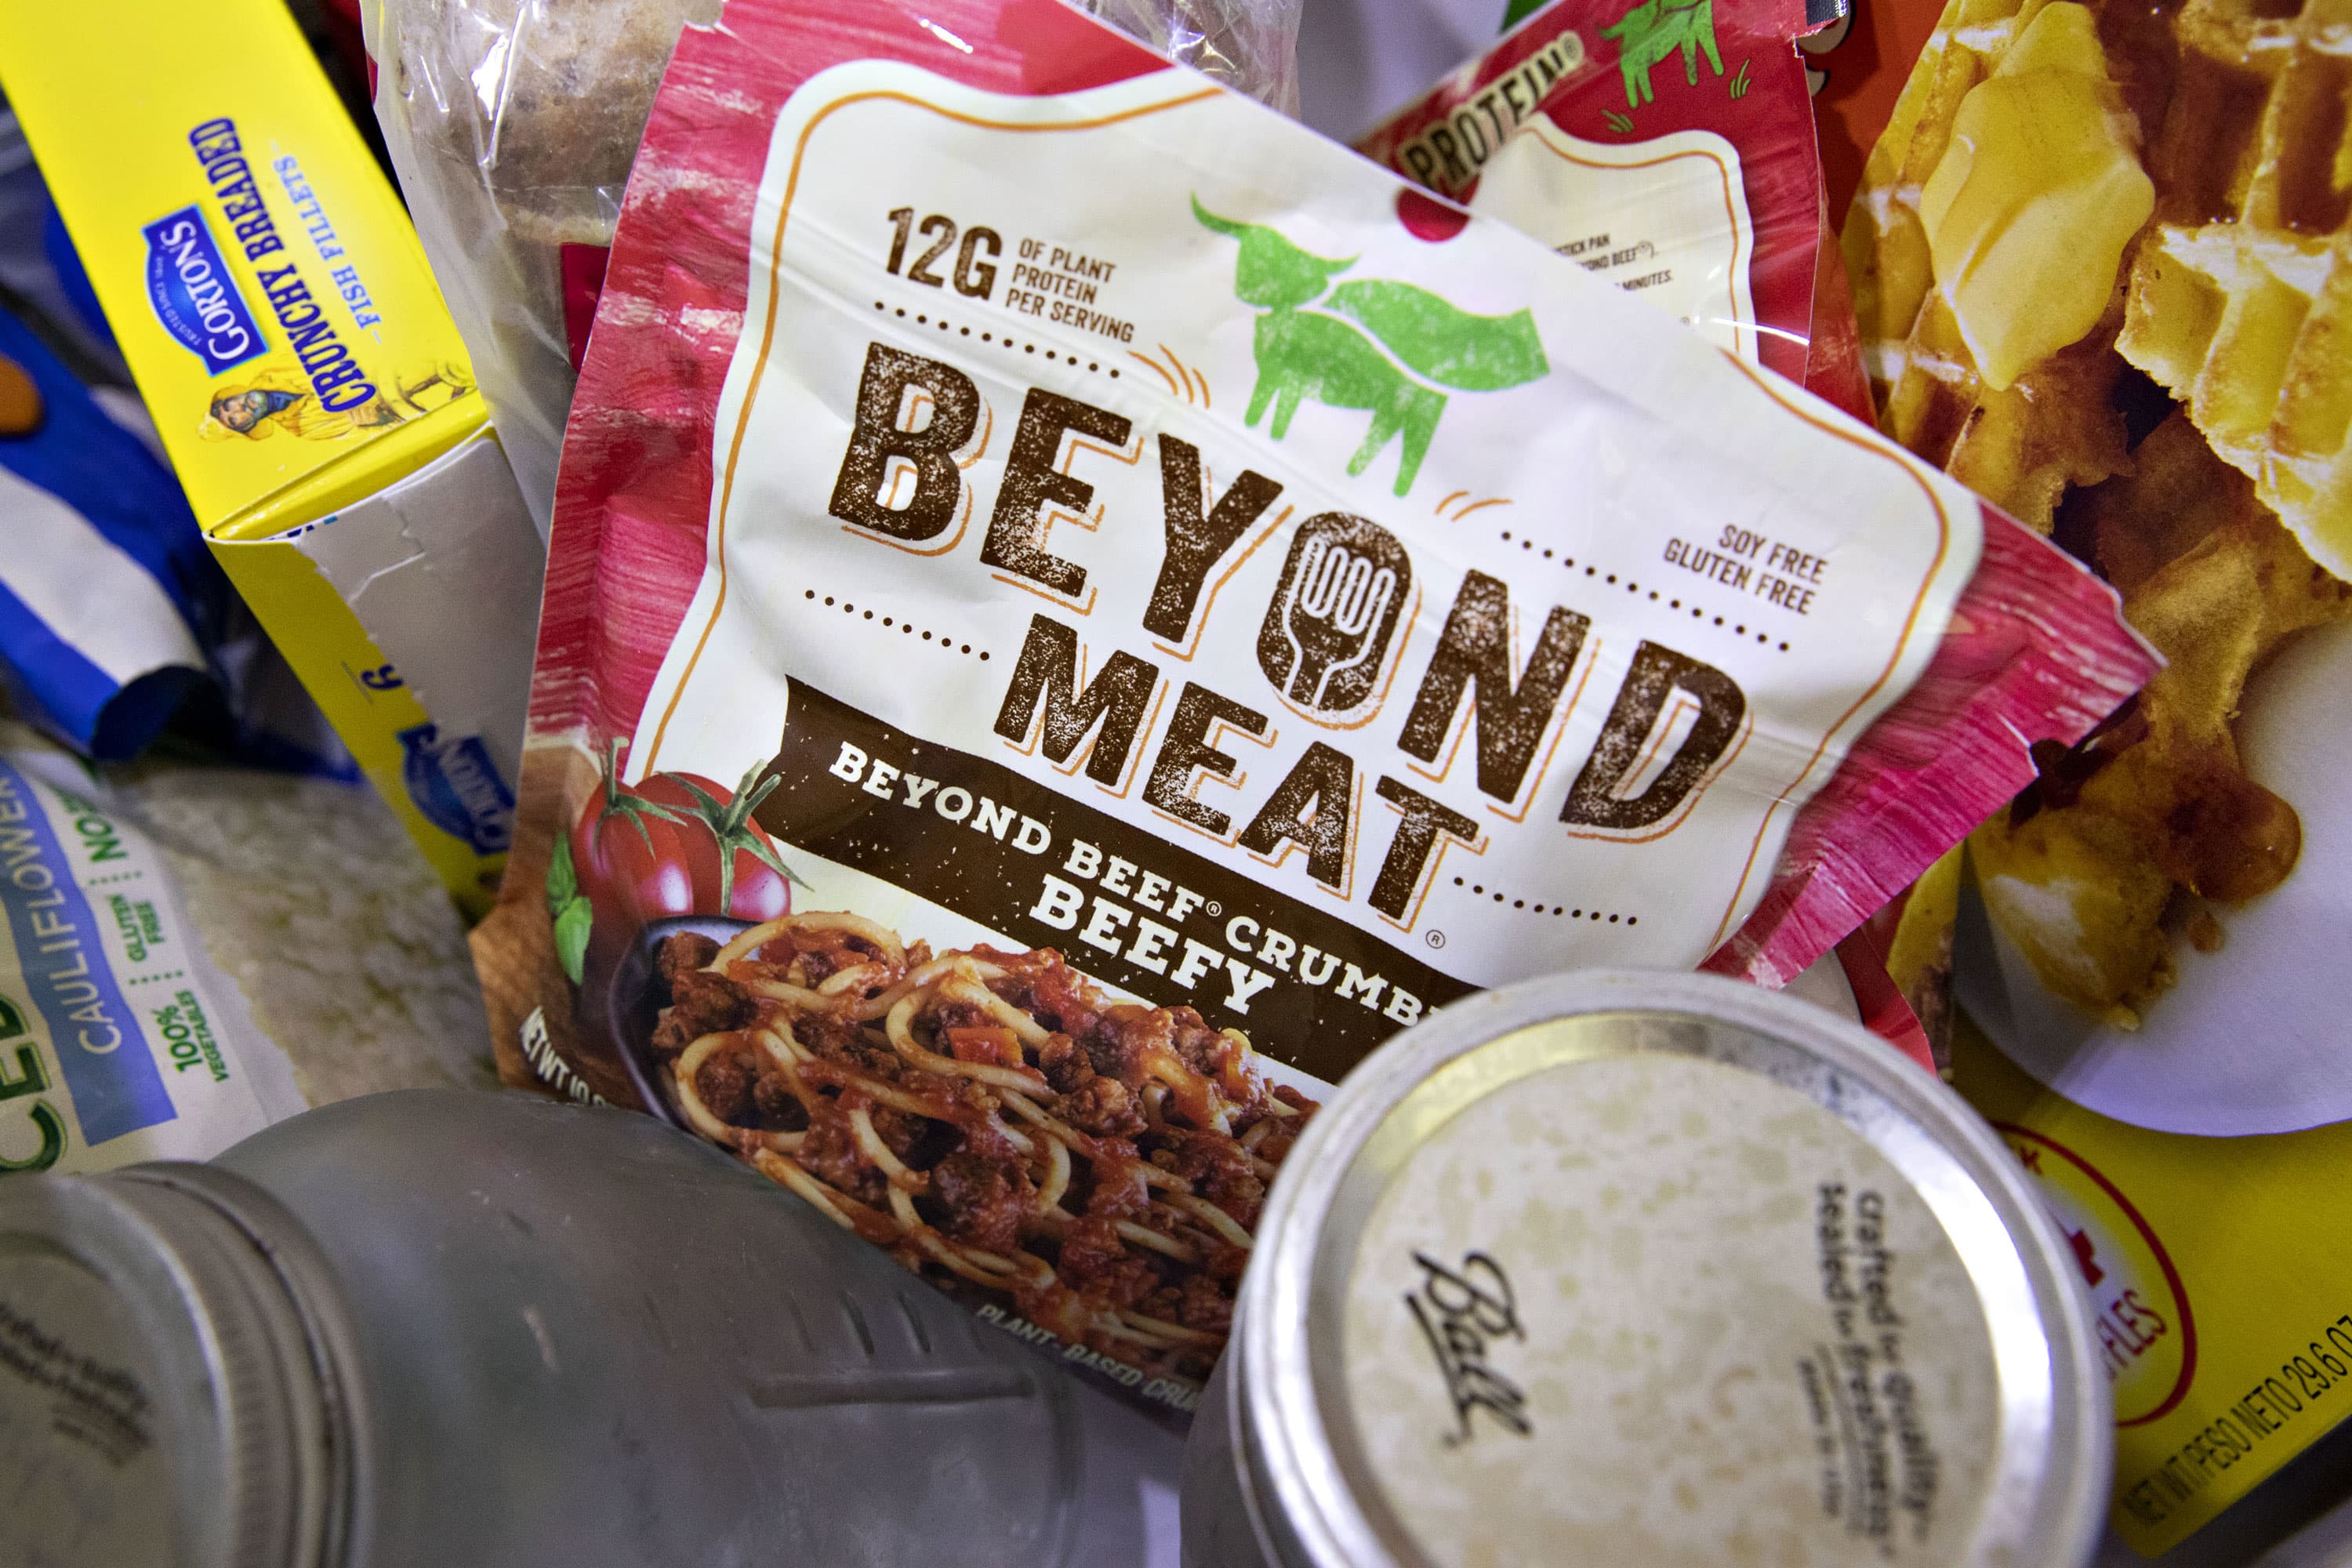 Beyond Meat stock climbs 13% as Starbucks plans to add more plant-based menu options